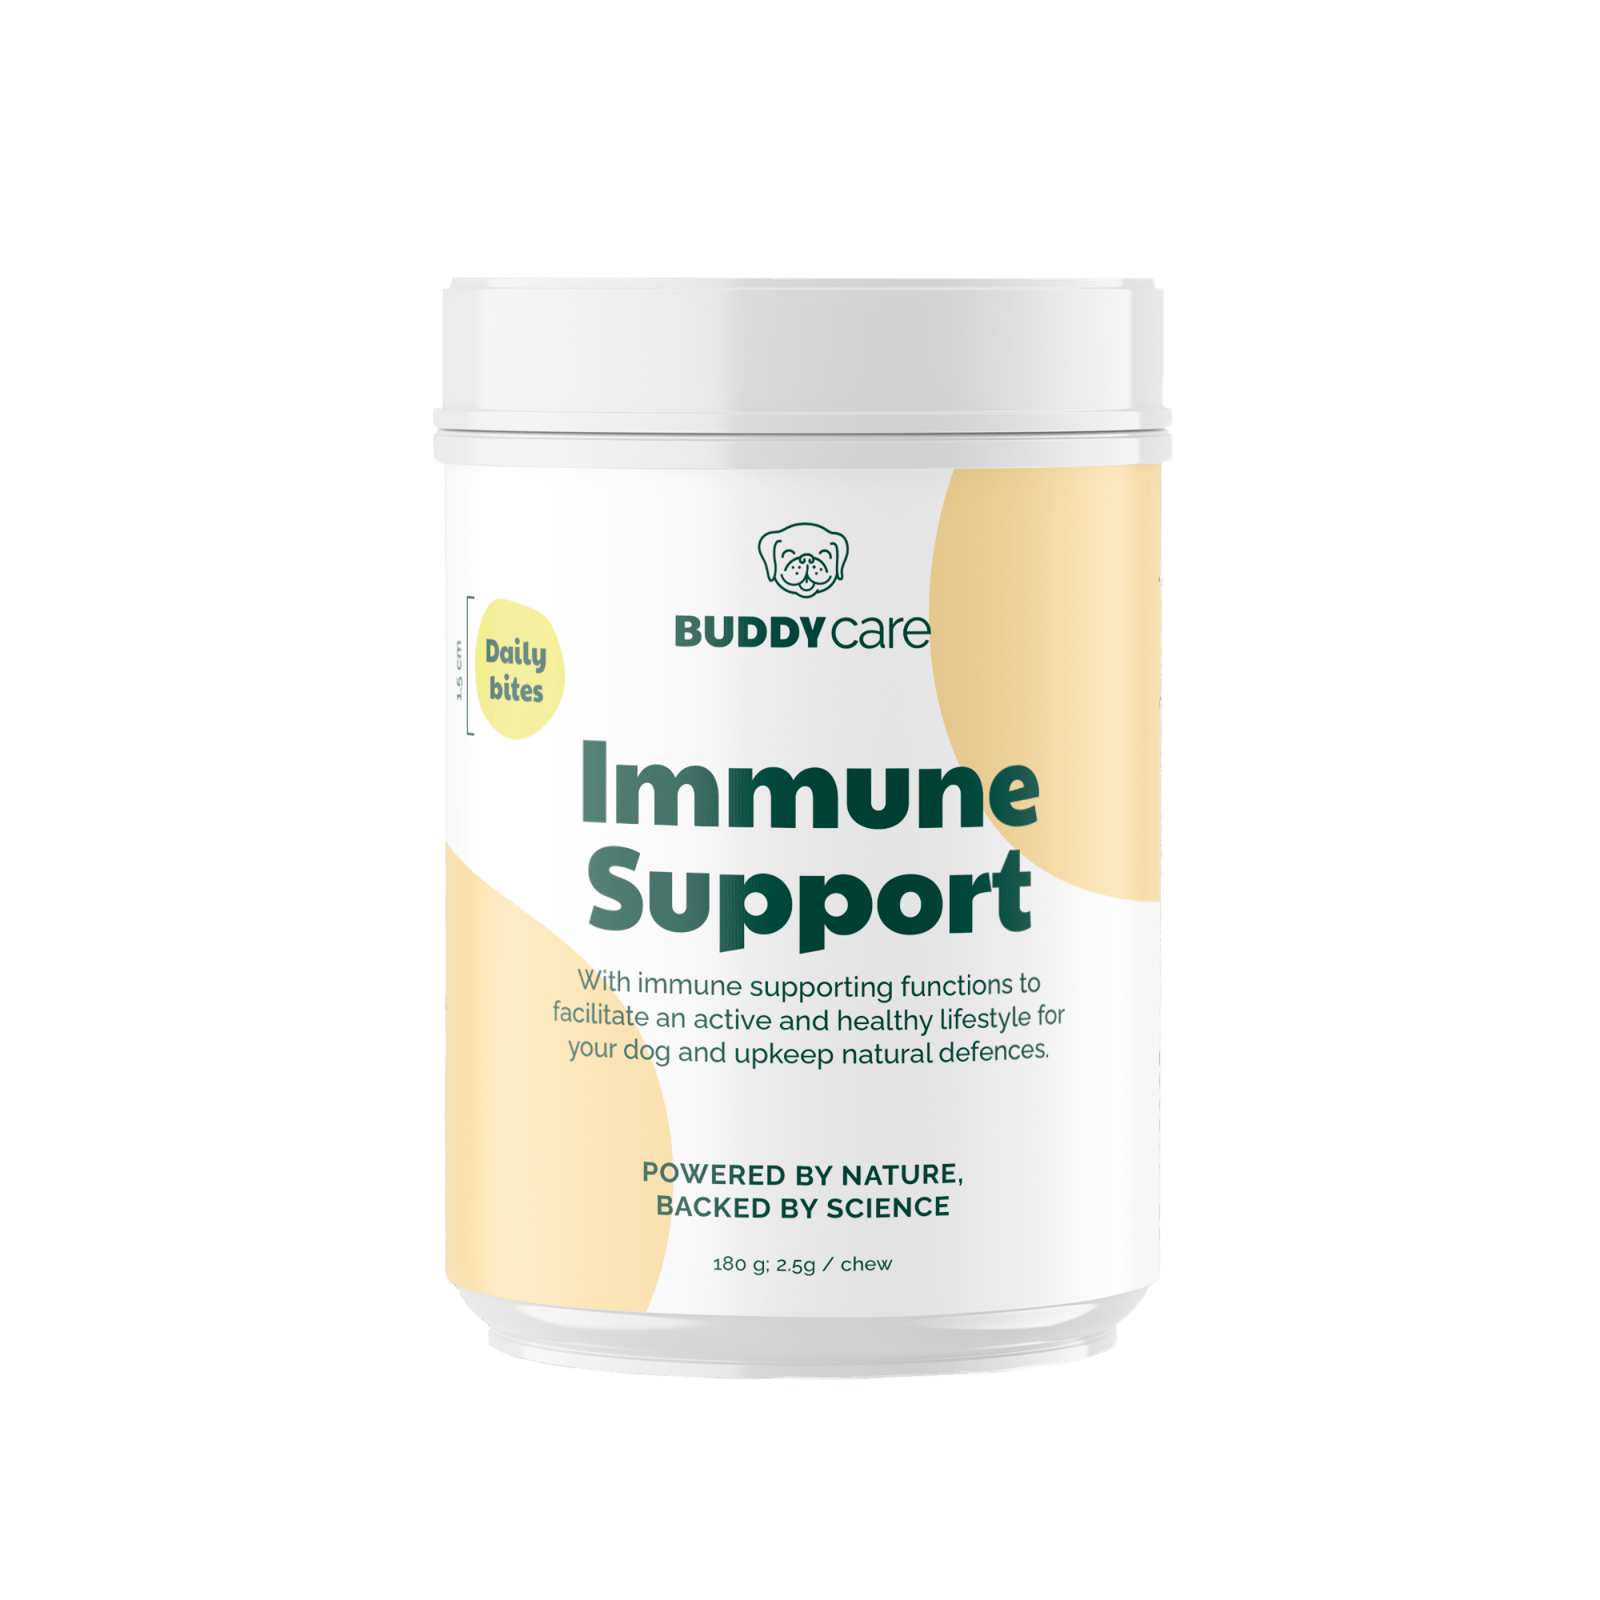 BUDDY Care Immune Support 180g